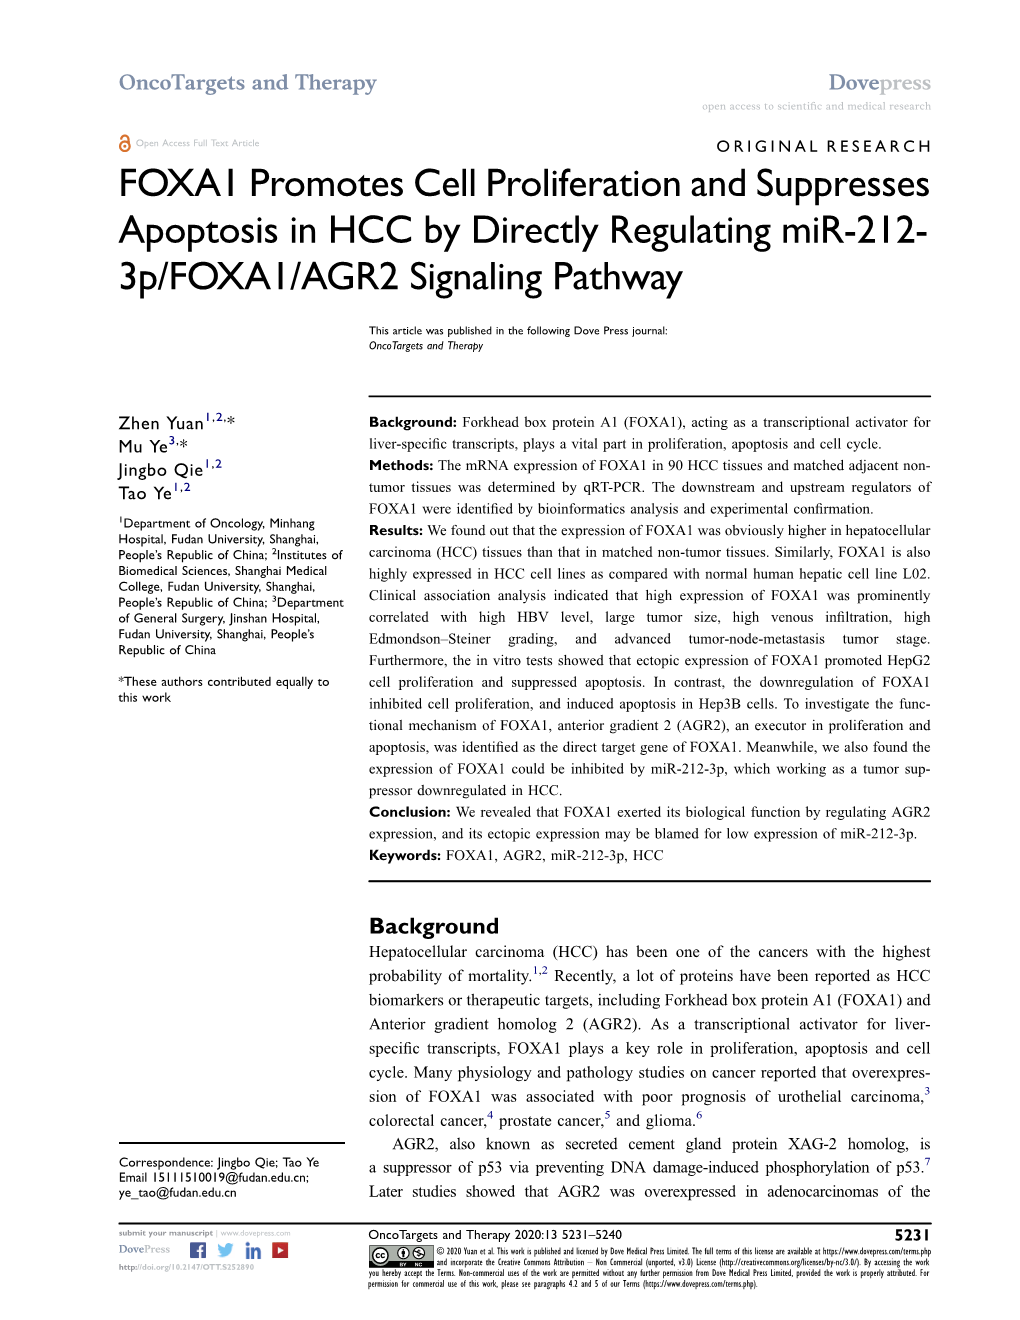 FOXA1 Promotes Cell Proliferation and Suppresses Apoptosis in HCC by Directly Regulating Mir-212- 3P/FOXA1/AGR2 Signaling Pathway